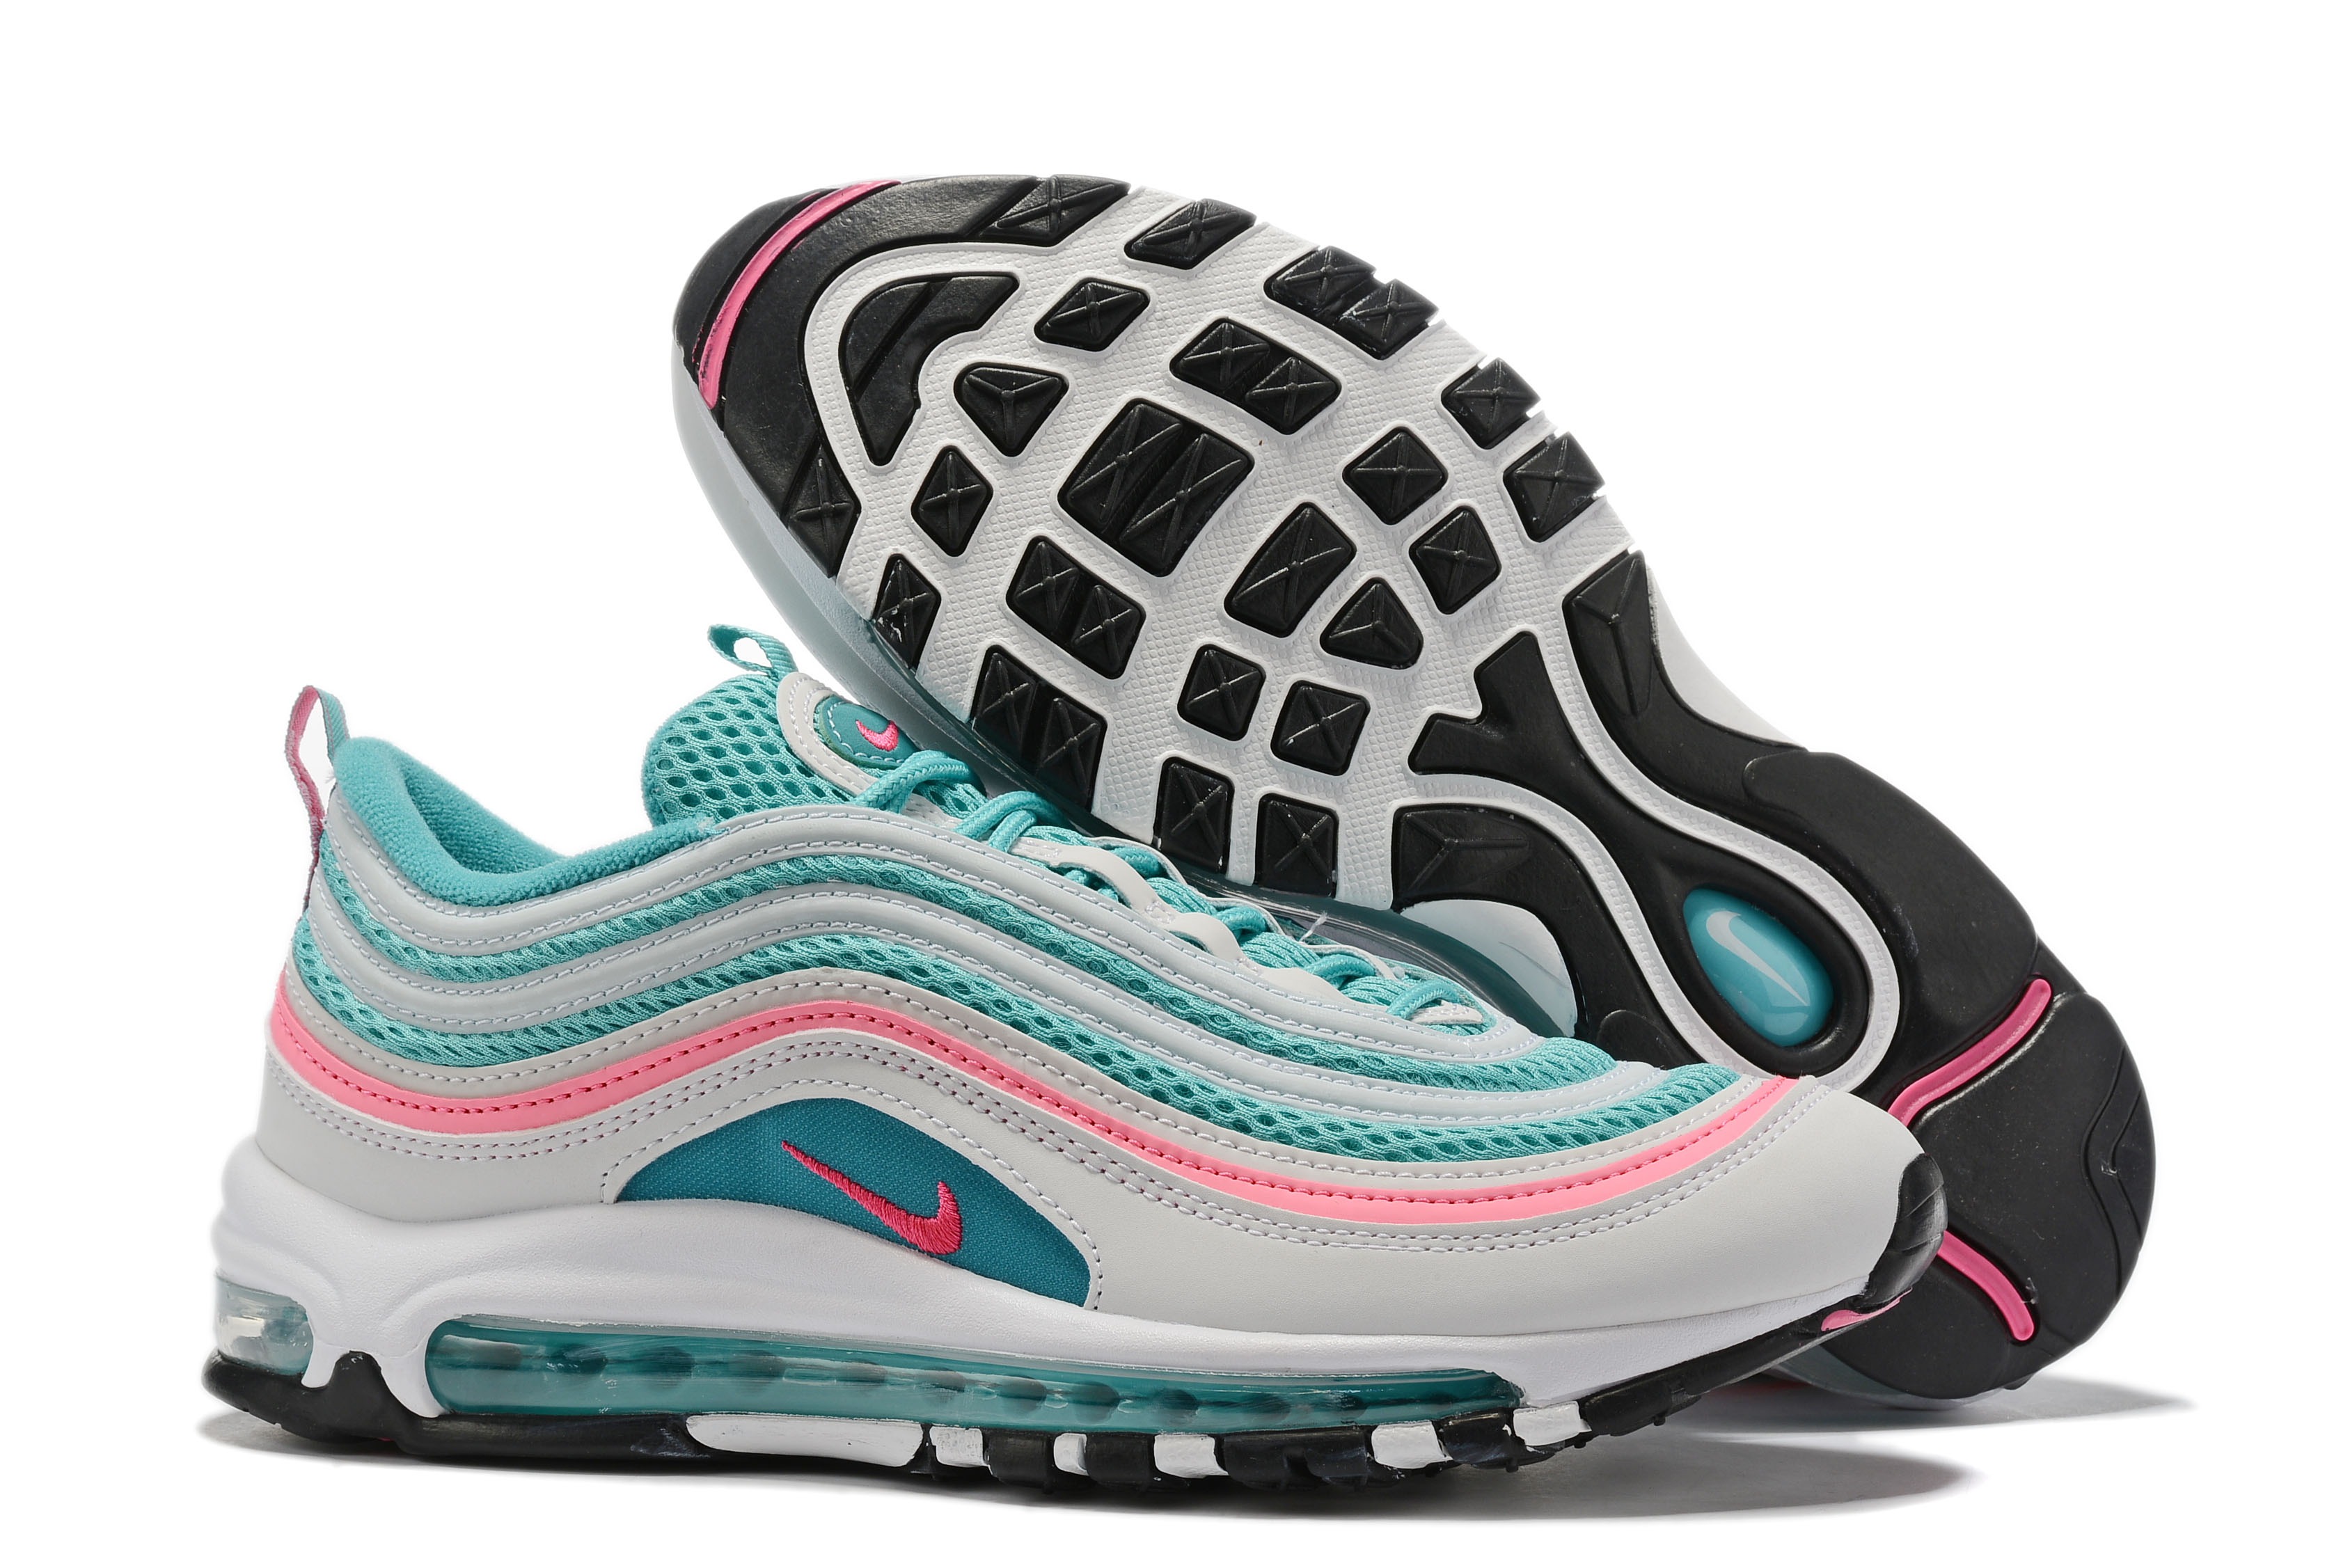 Women's Running weapon Air Max 97 Shoes 005